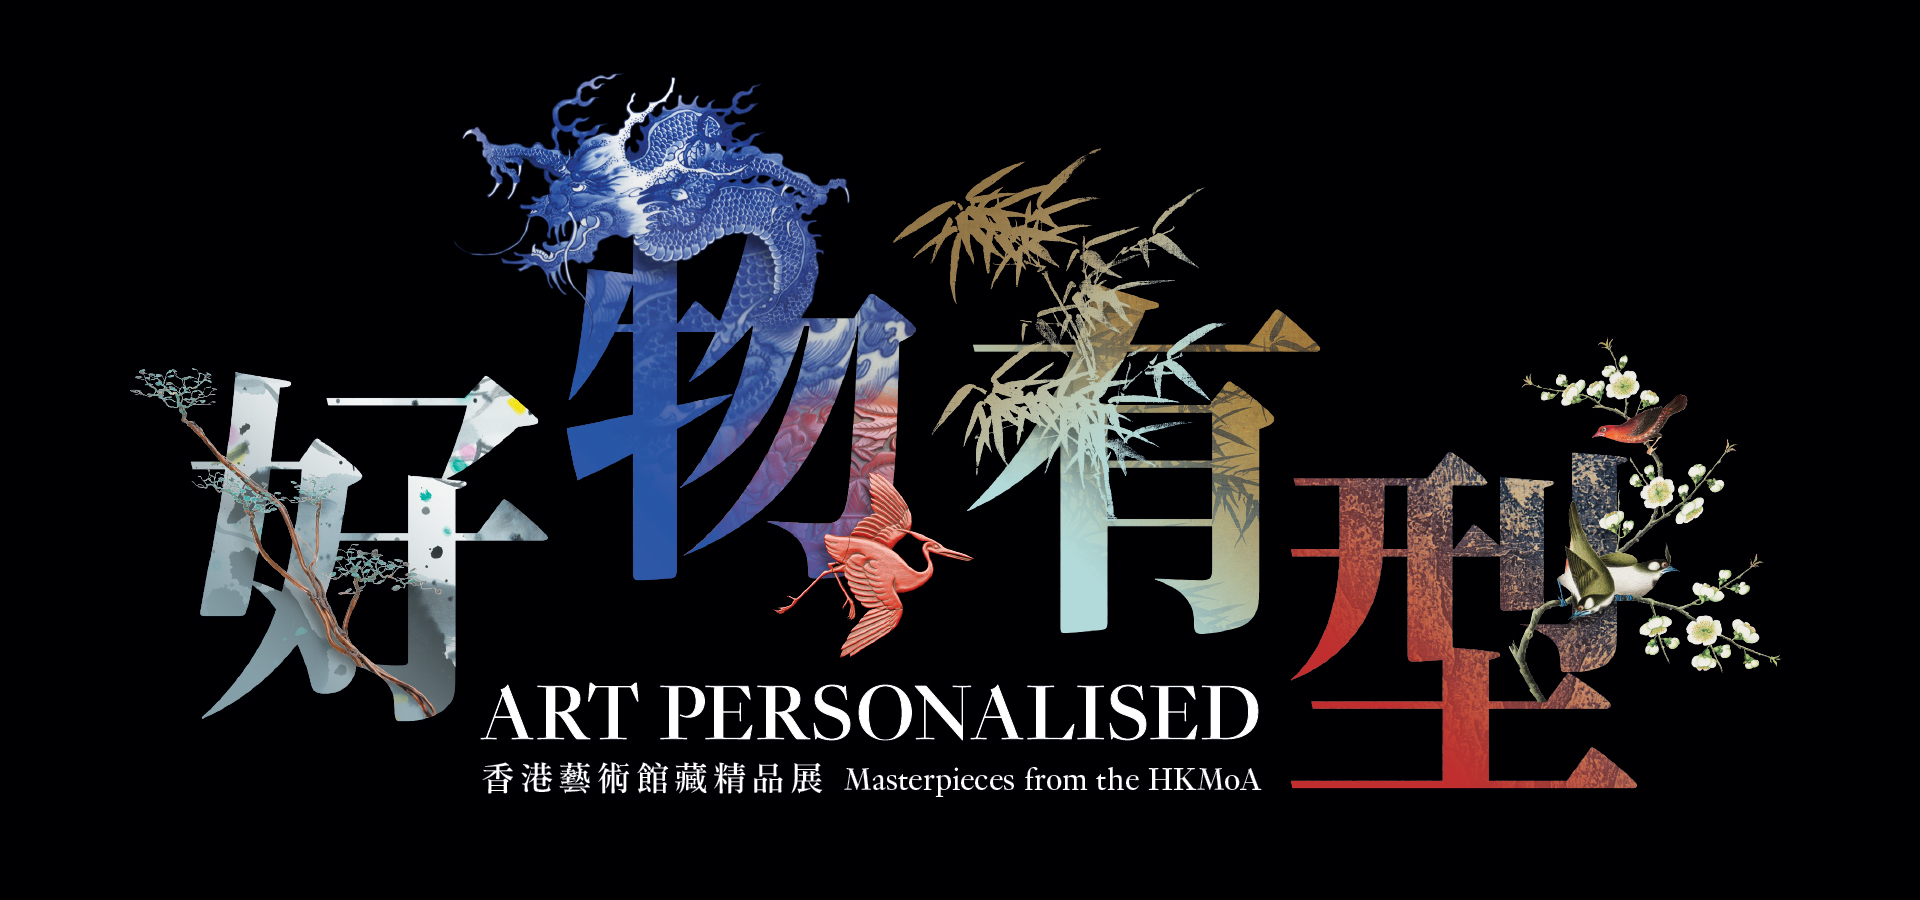 Art Personalised: Masterpieces from the HKMoA